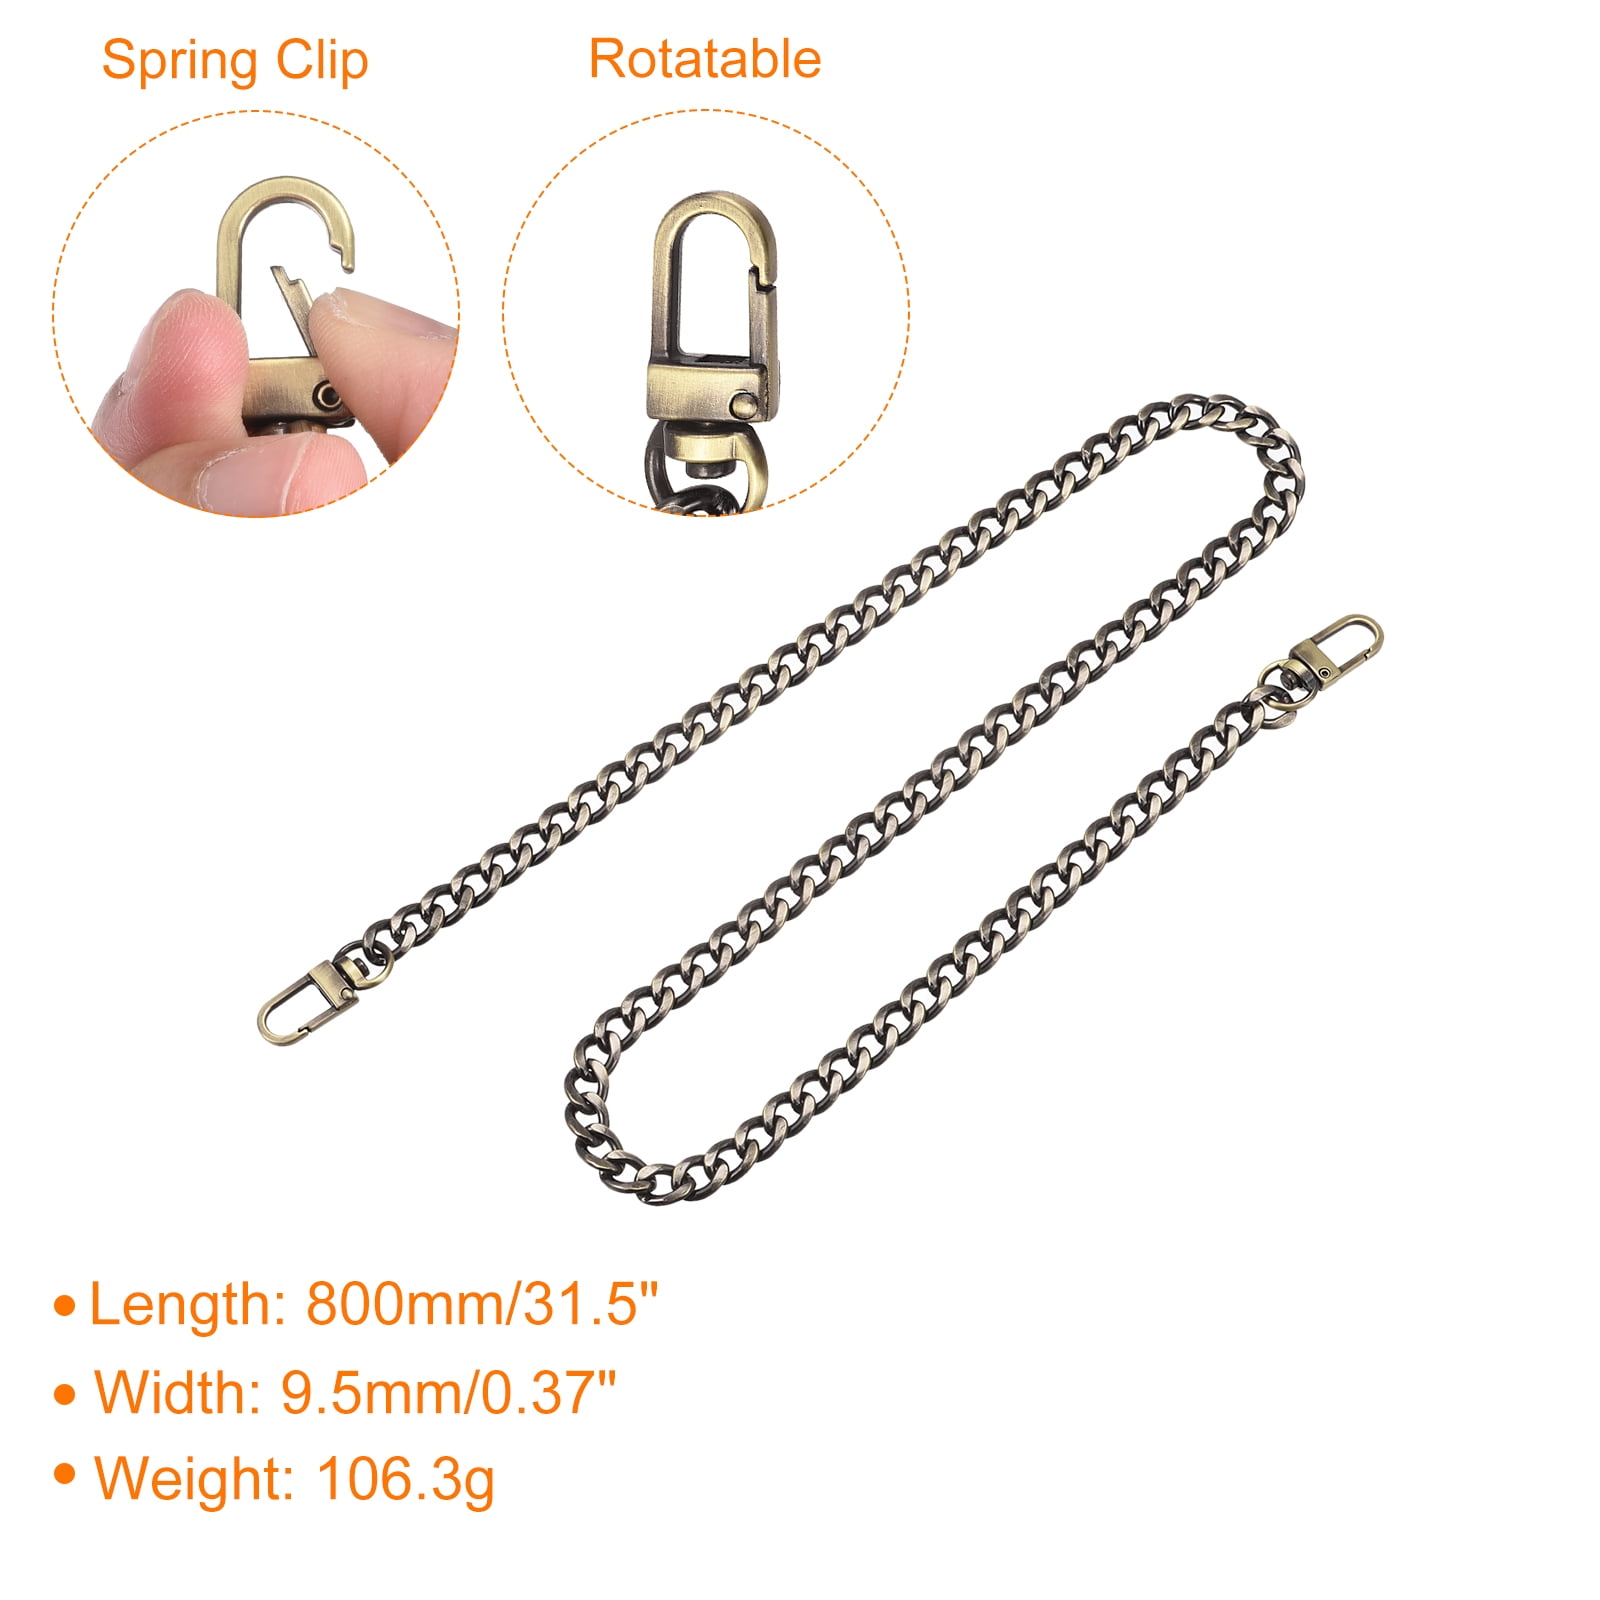  MELORDY 4pcs Flat Purse Chain Iron Replacement Shoulder  Crossbody Strap Bag Link Chains with Metal Buckles, 15.7/23.6/31.5/47.2  Inch (Gold)